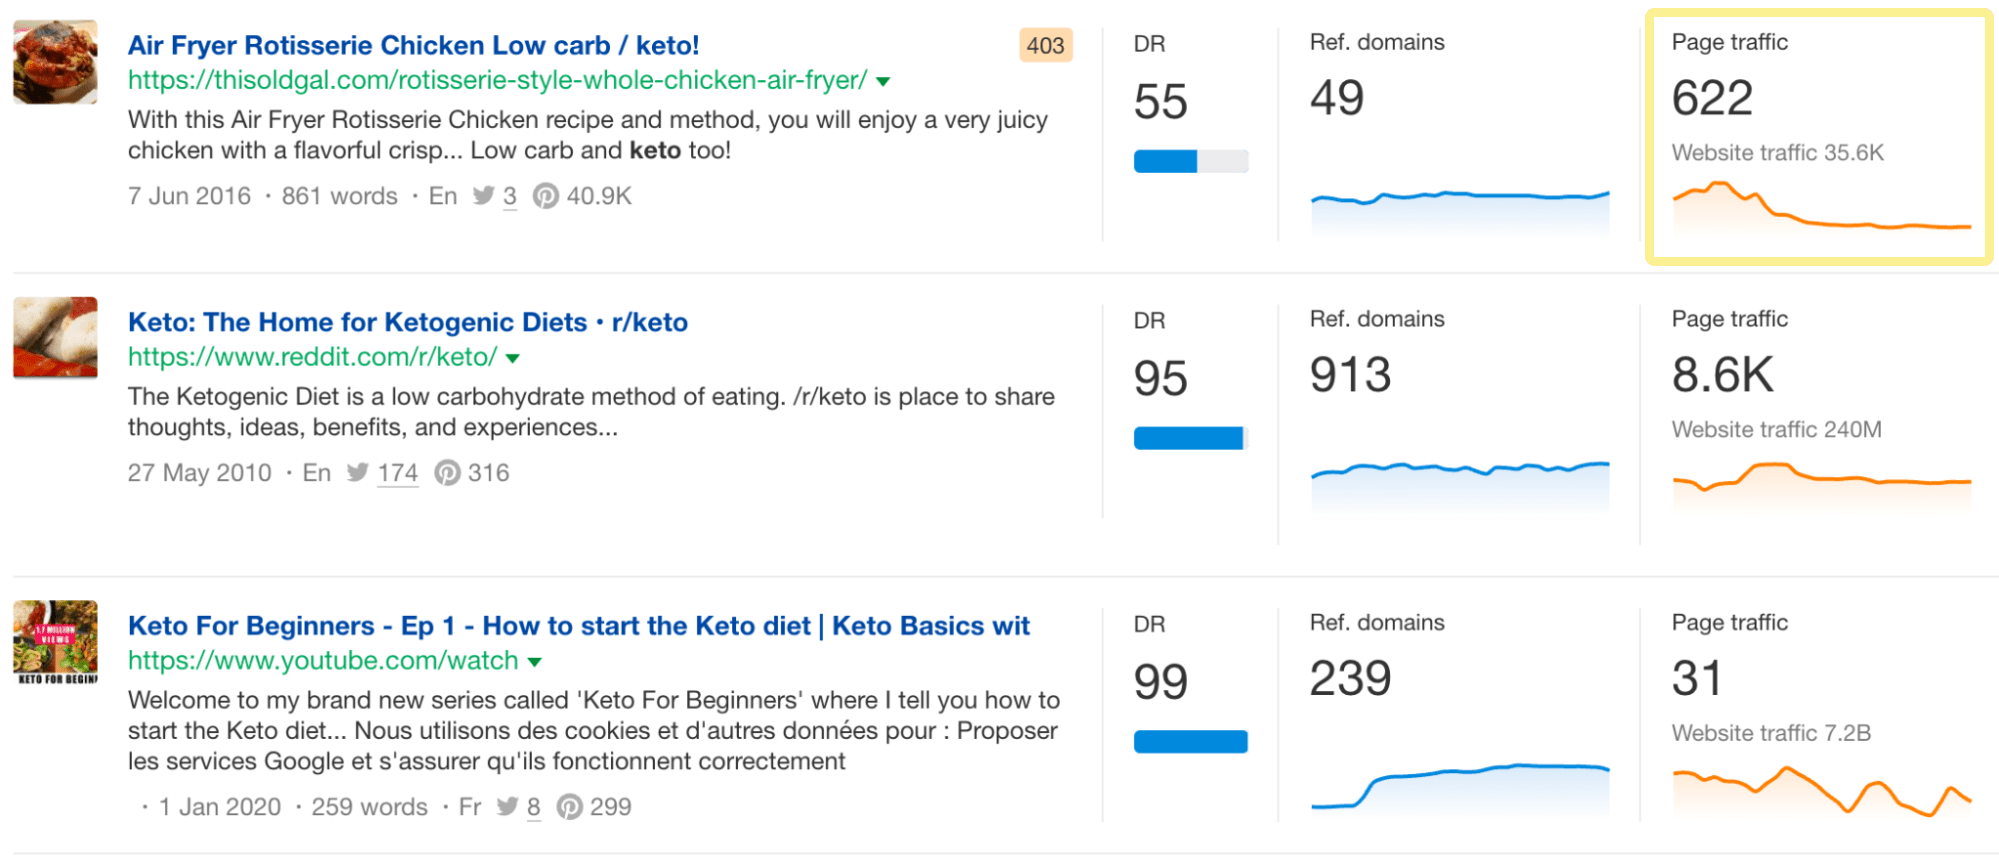 Pages that are declining in traffic, via Ahrefs' Content Explorer